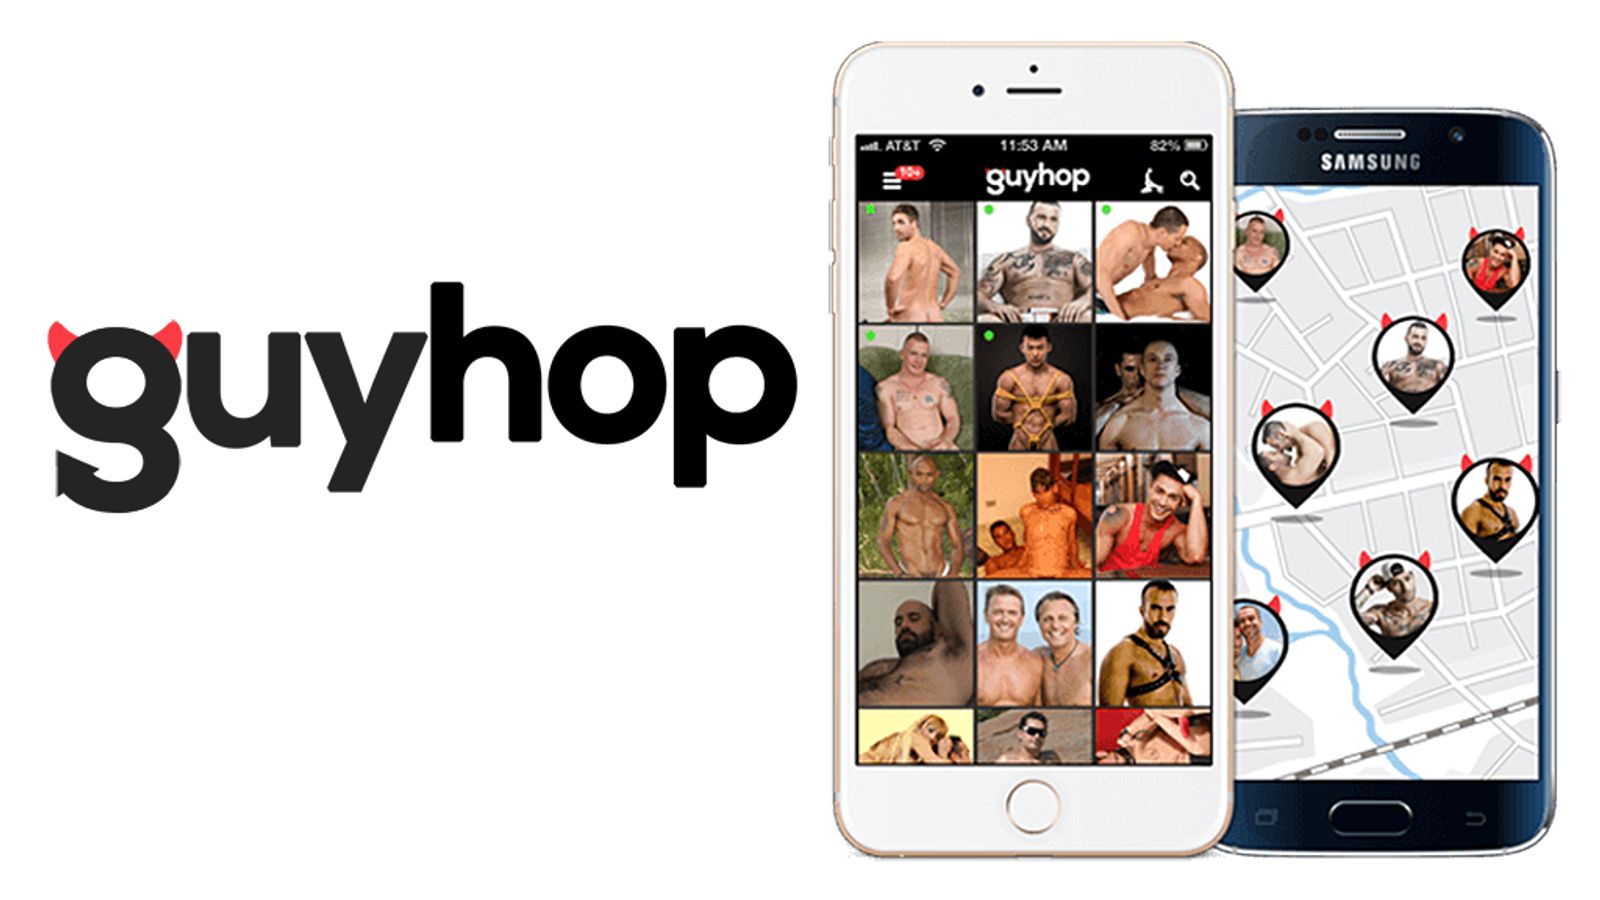 Gay Hookup Site Guyhop to Implement Blockchain Tech